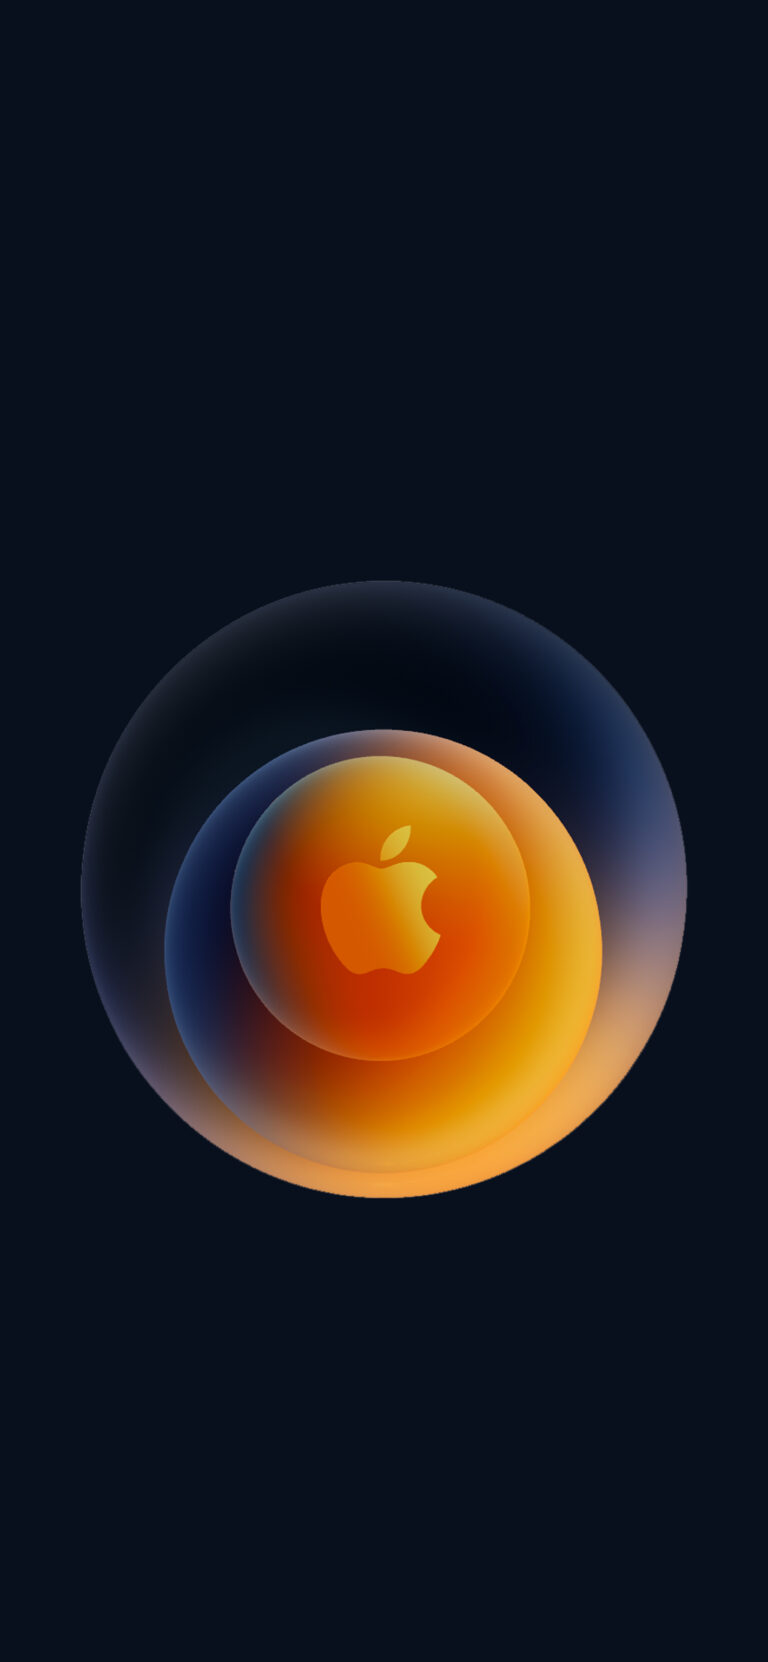 Hi, Speed - Apple Event for iPhone 12 - Official Wallpaper in HQ ...